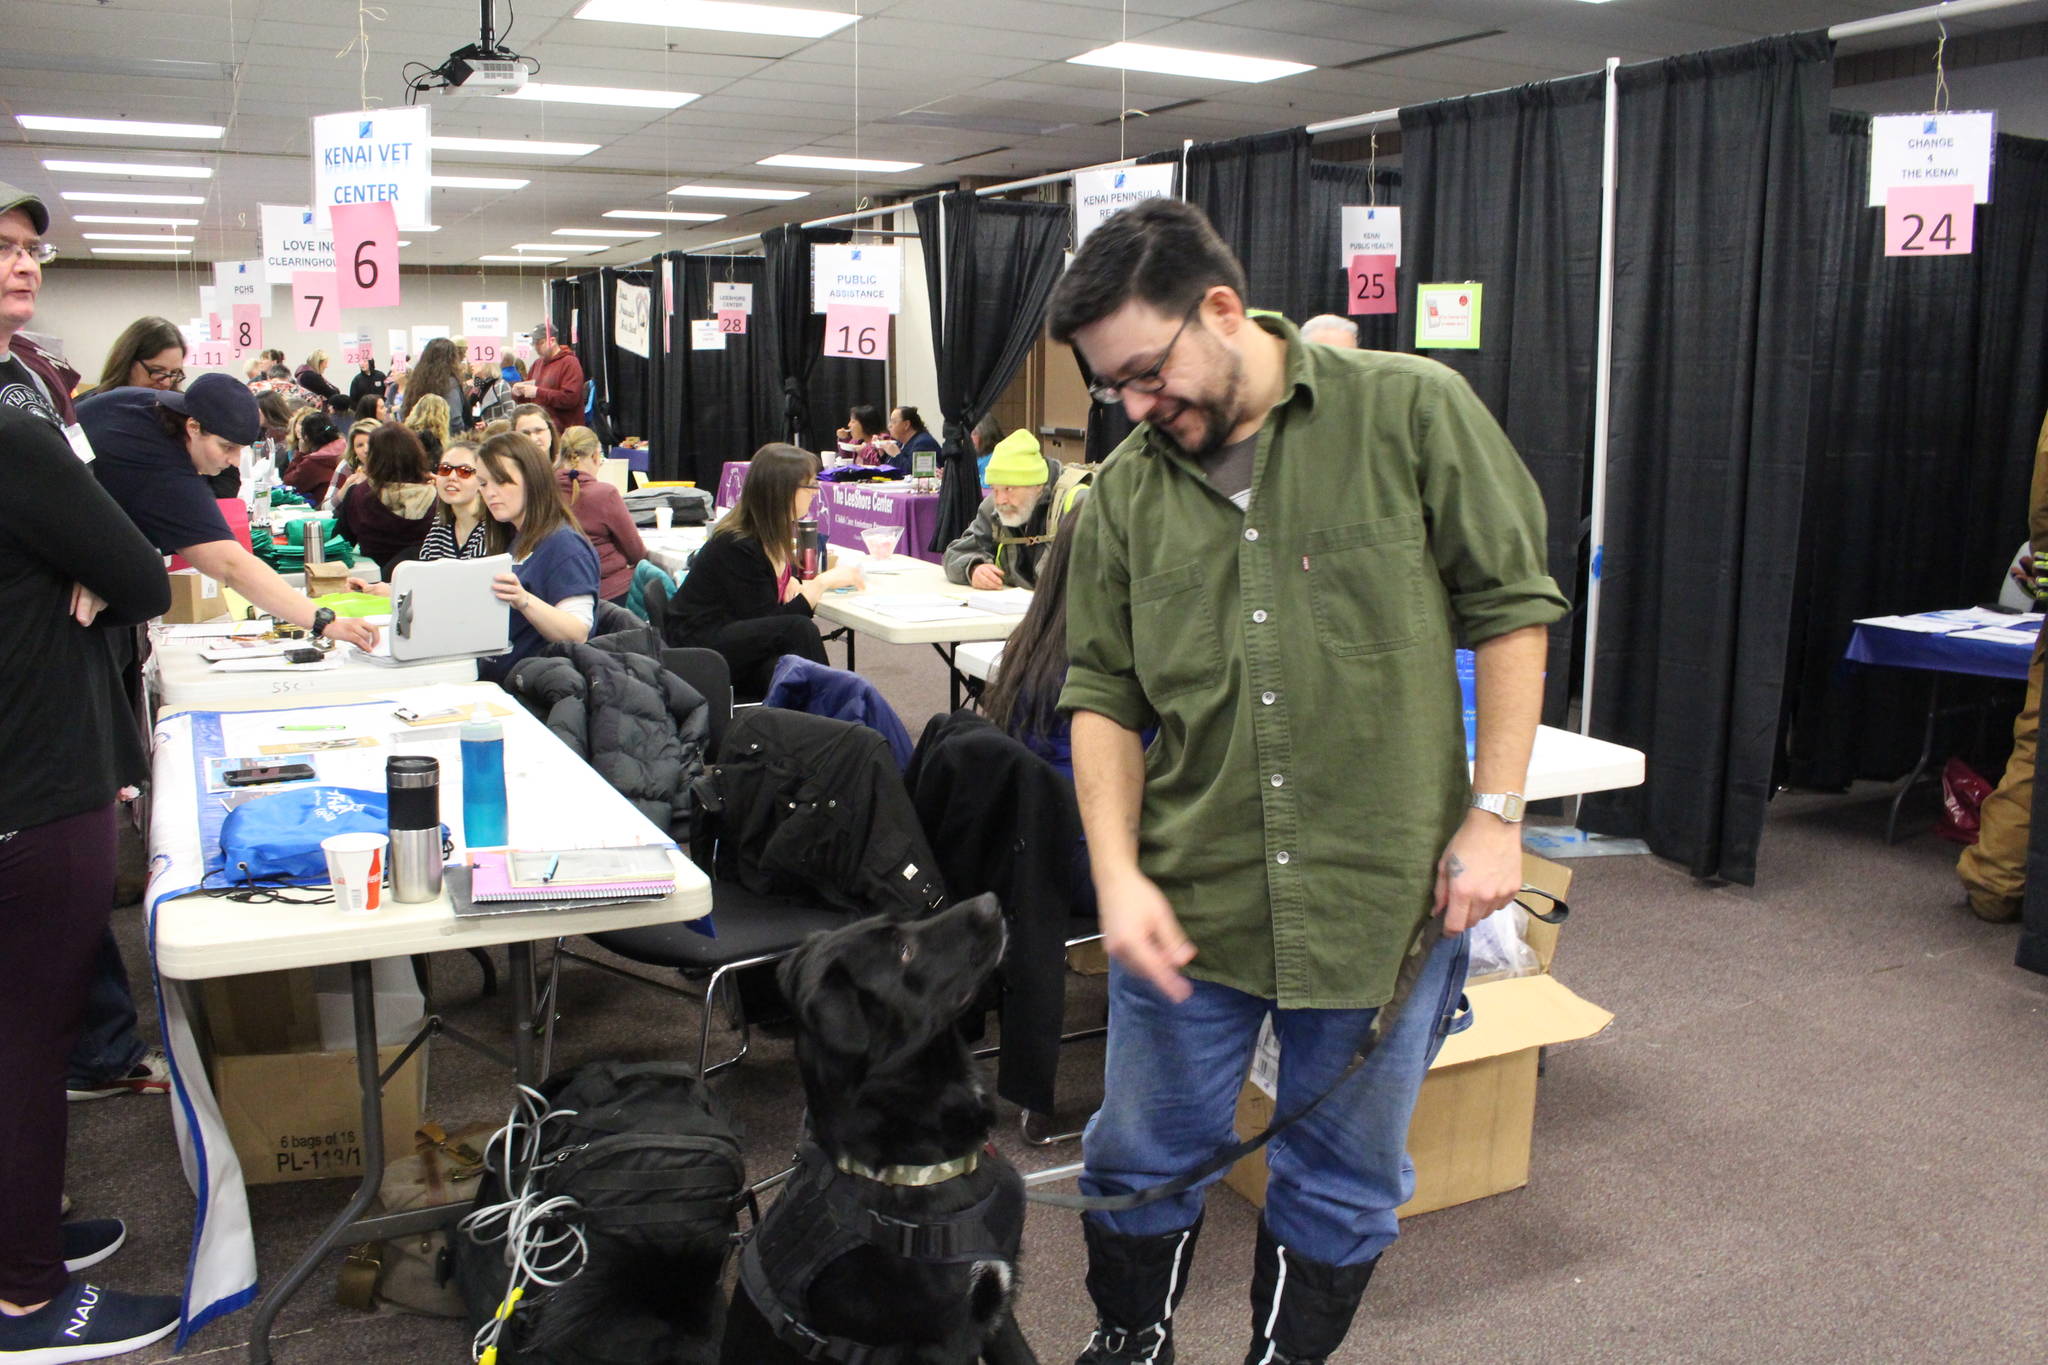 Brian Mazurek / Peninsula Clarion
Kenneth Russell and his dog Ichabod, aka “Icky,” pose for the camera on Jan. 29 during the 2020 Project Homeless Connect event at the Soldotna Regional Sports Complex in Soldotna.
Kenneth Russell and his dog Ichabod, aka “Icky”, pose for the camera during the 2020 Project Homeless Connect event at the Soldotna Regional Sports Complex in Soldotna, Alaska on Jan. 29, 2020. (Photo by Brian Mazurek/Peninsula Clarion)